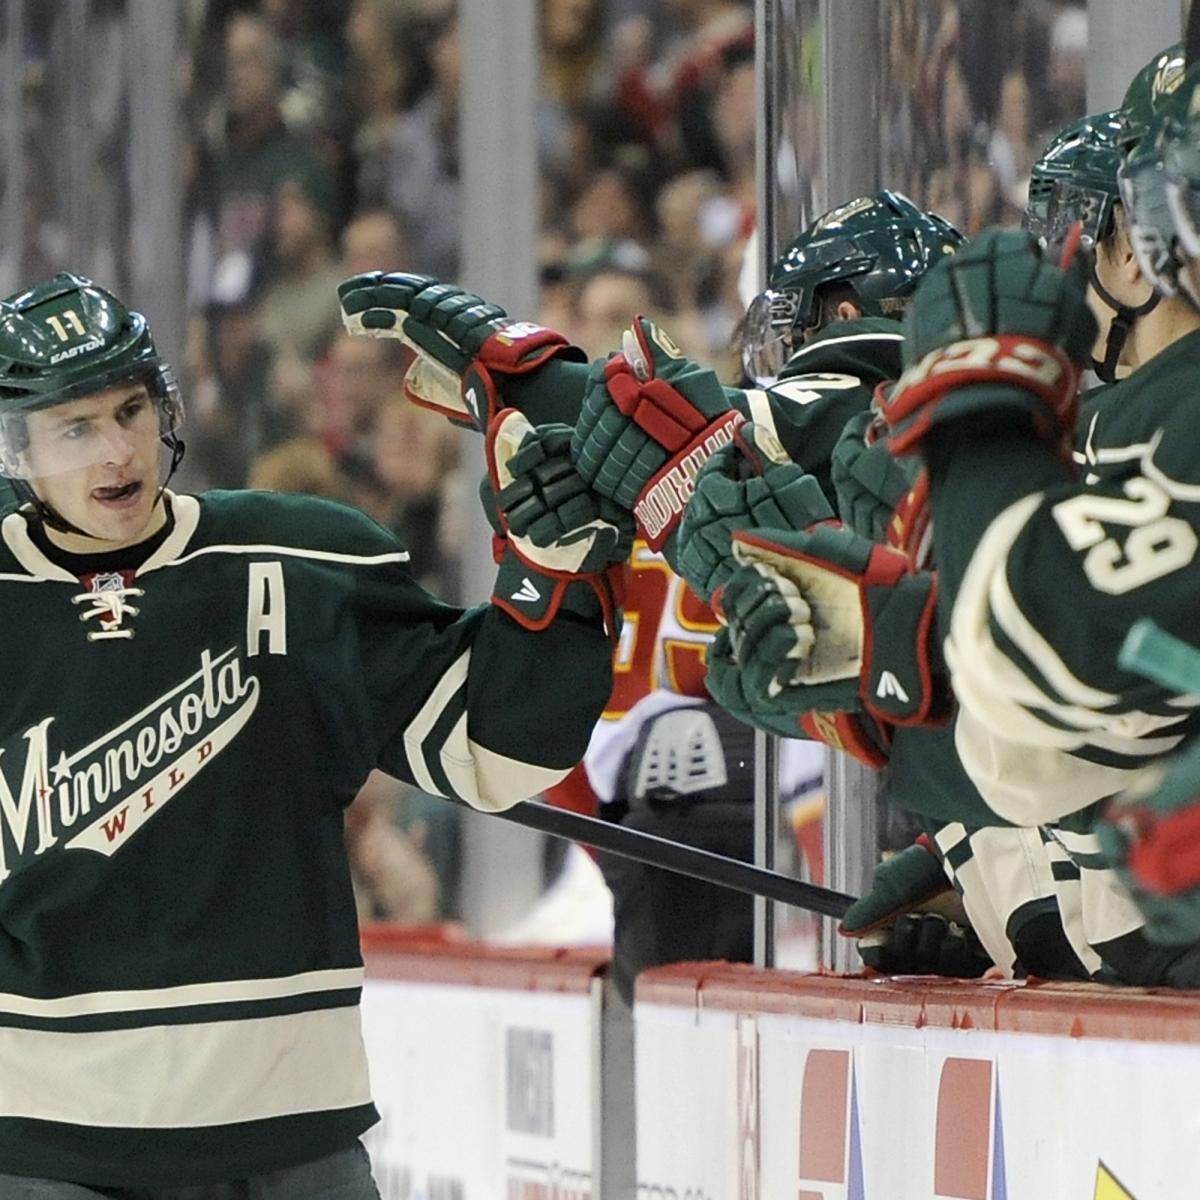 Report: Wild place Matt Cooke on waivers to buy out contract